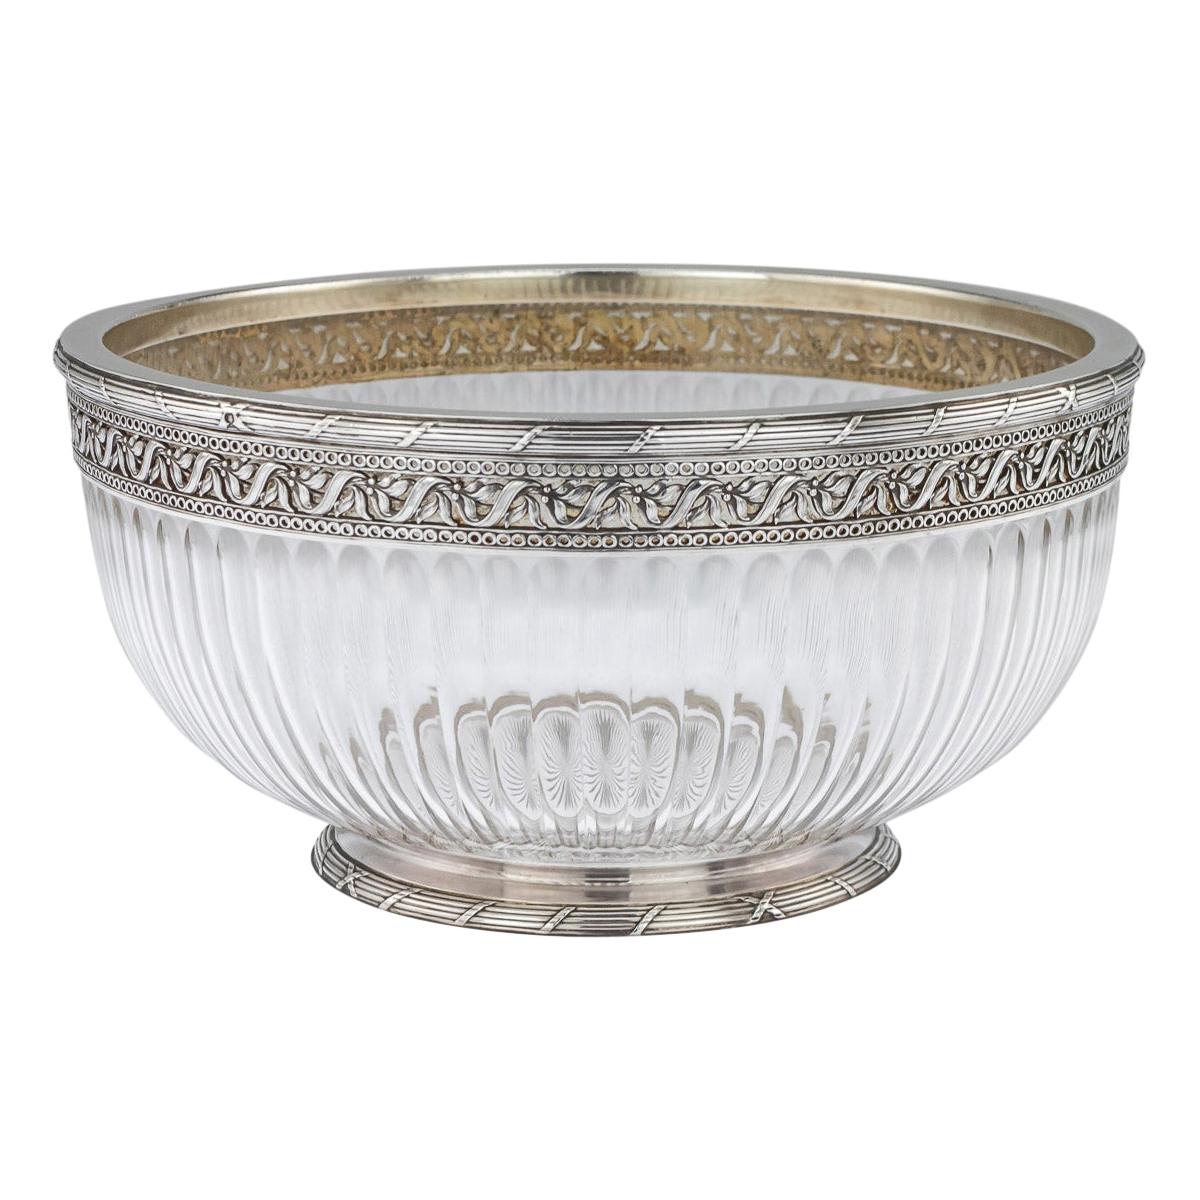 20th Century French Empire Solid Silver & Glass Bowl, Paris, c.1900